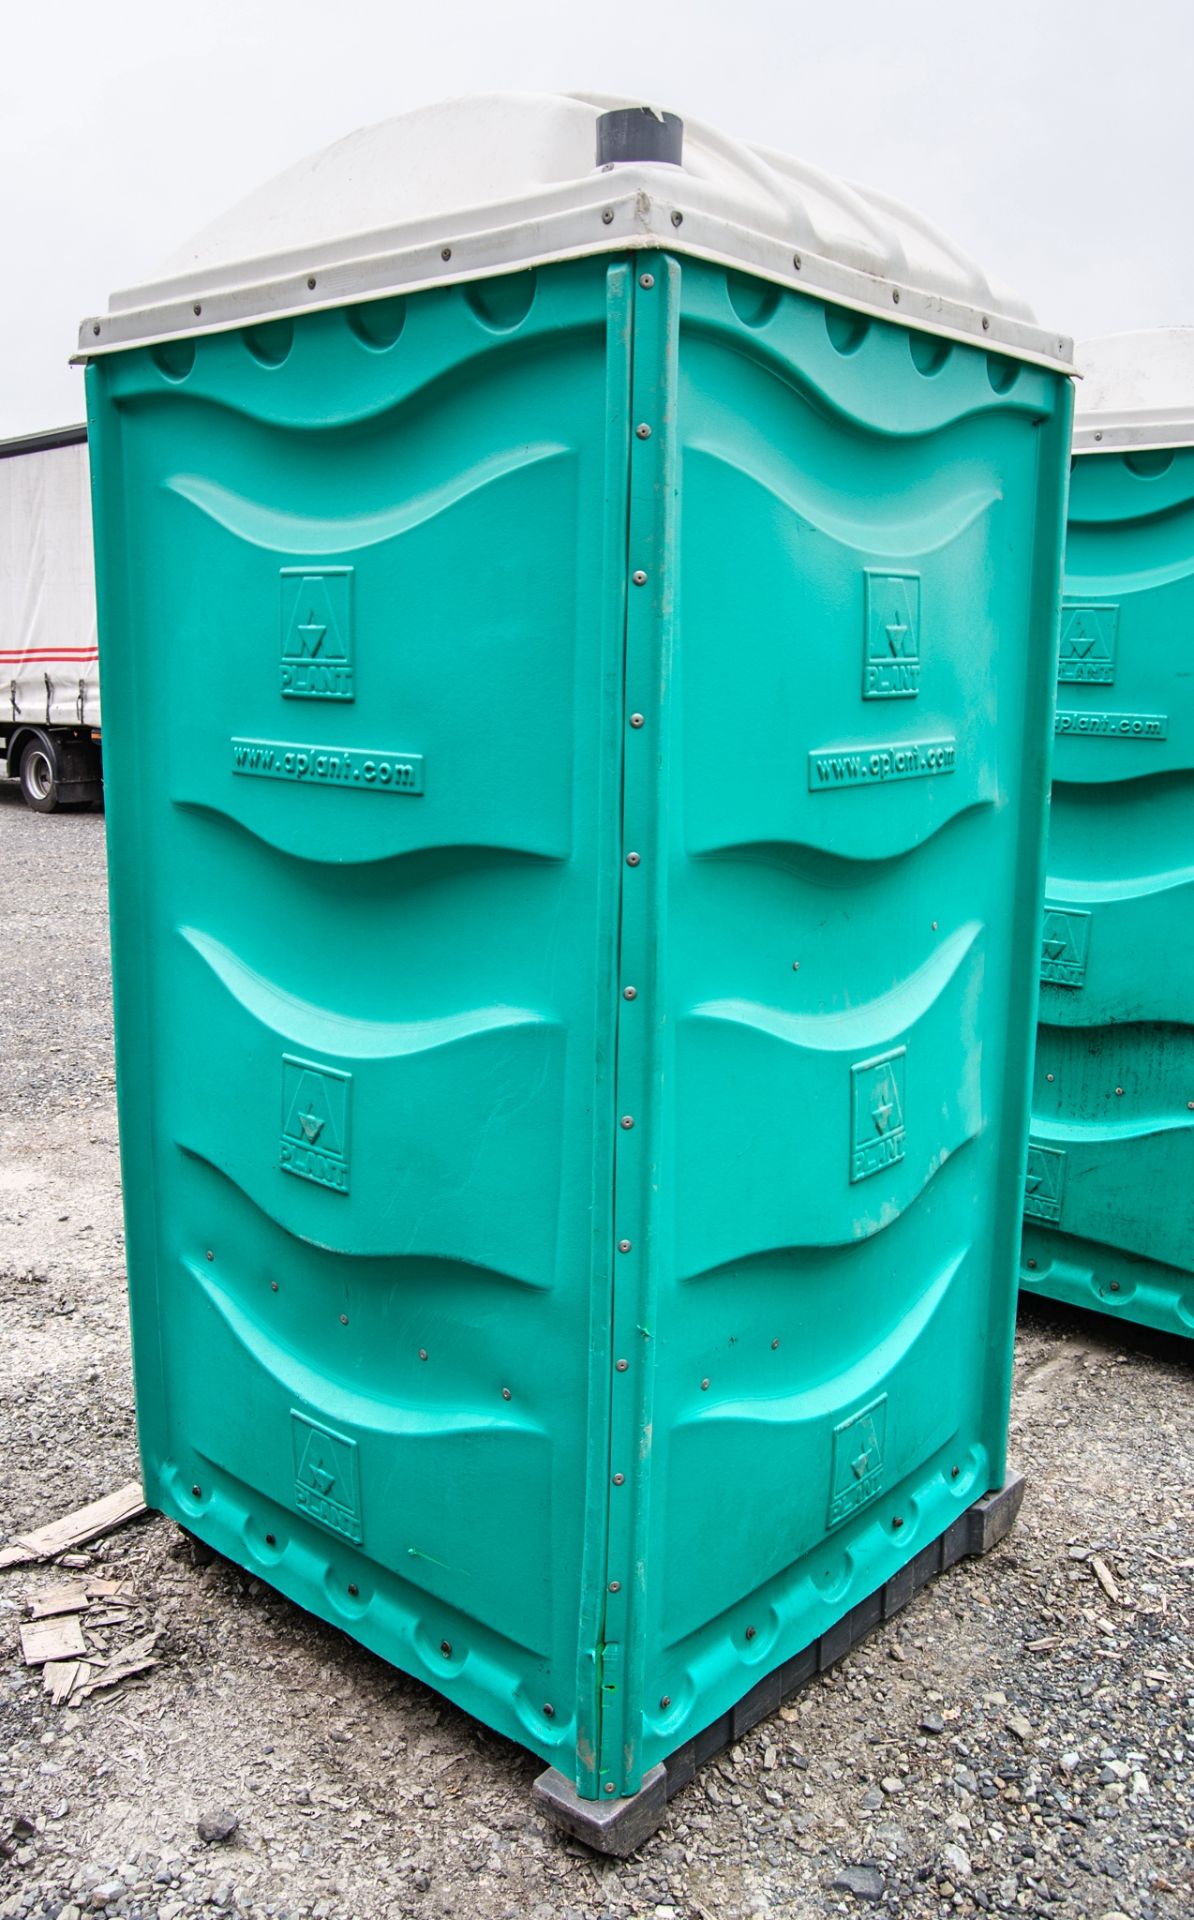 Plastic portable toilet A415469 - Image 2 of 3